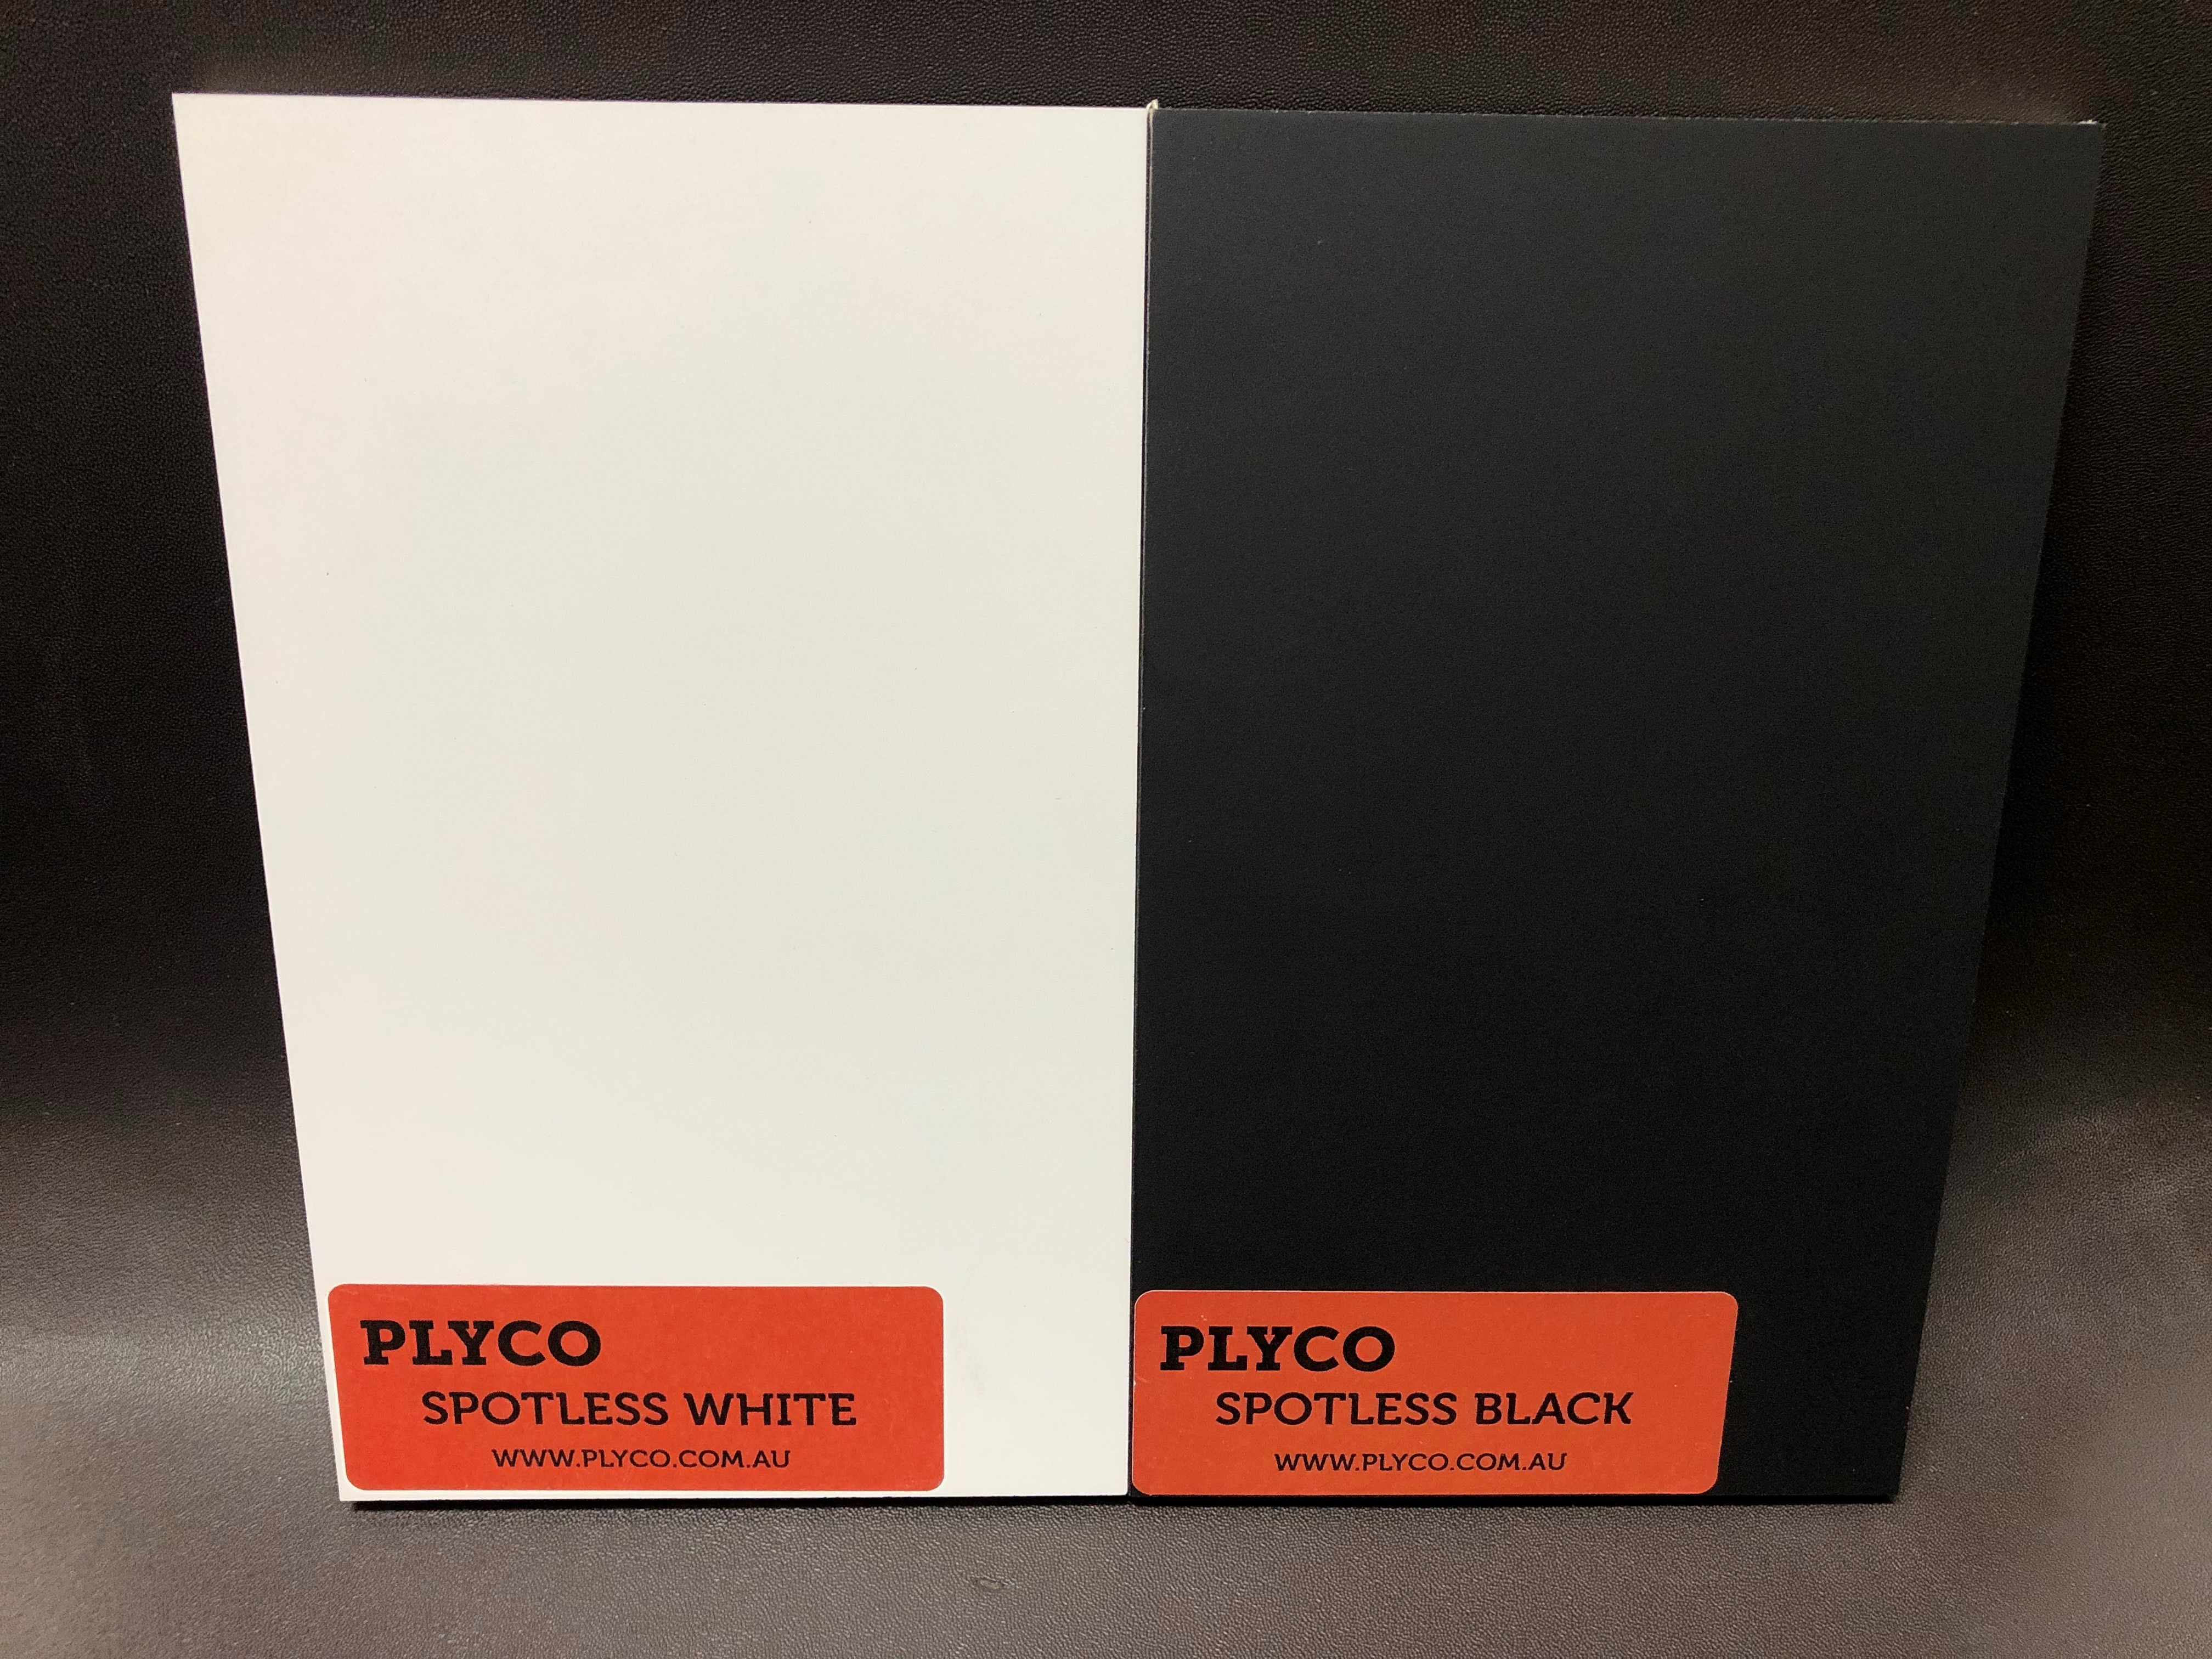 Plyco's matte Spotless Laminated Plywood